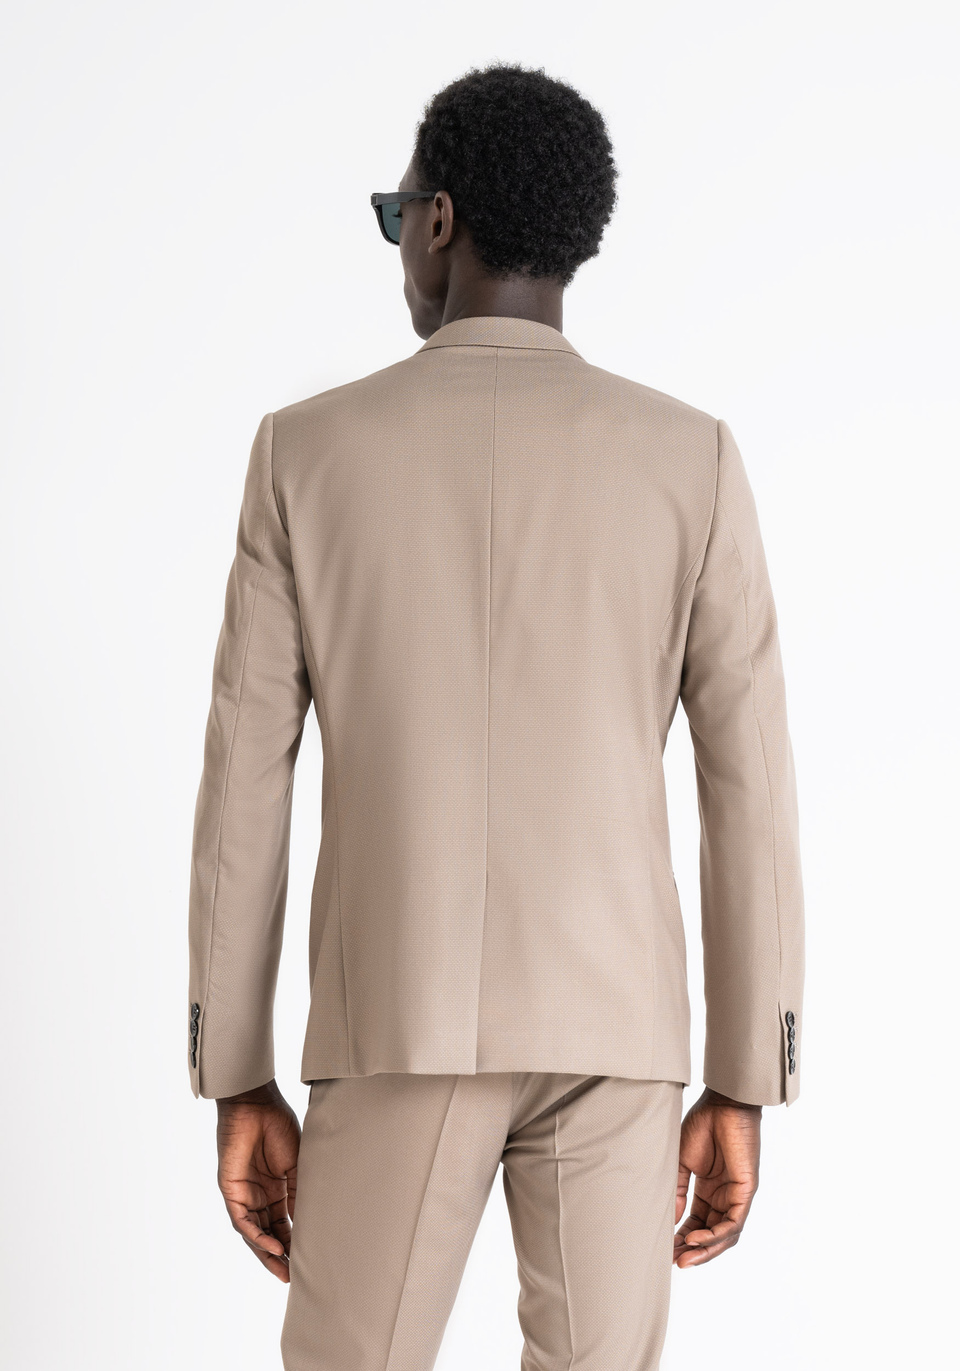 BONNIE SLIM FIT JACKET IN VISCOSE BLEND STRETCH FABRIC WITH MICRO PATTERN - Antony Morato Online Shop